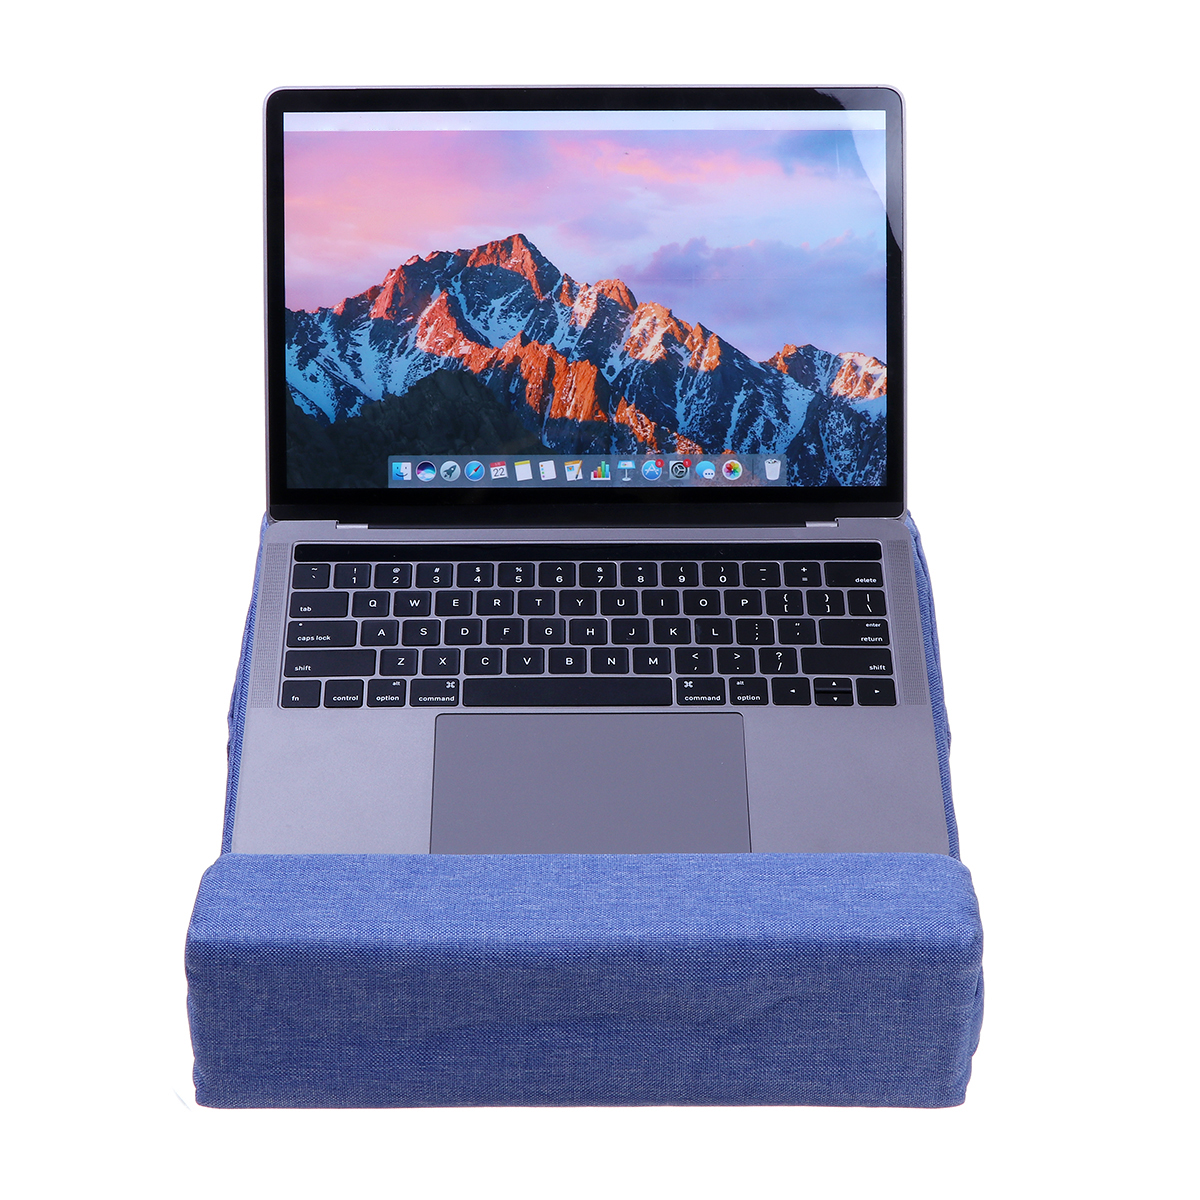 Find Laptop Stand Multicolor Portable Tablet Cushion Lap Rest Cushion for Laptop Magazines Books for Sale on Gipsybee.com with cryptocurrencies